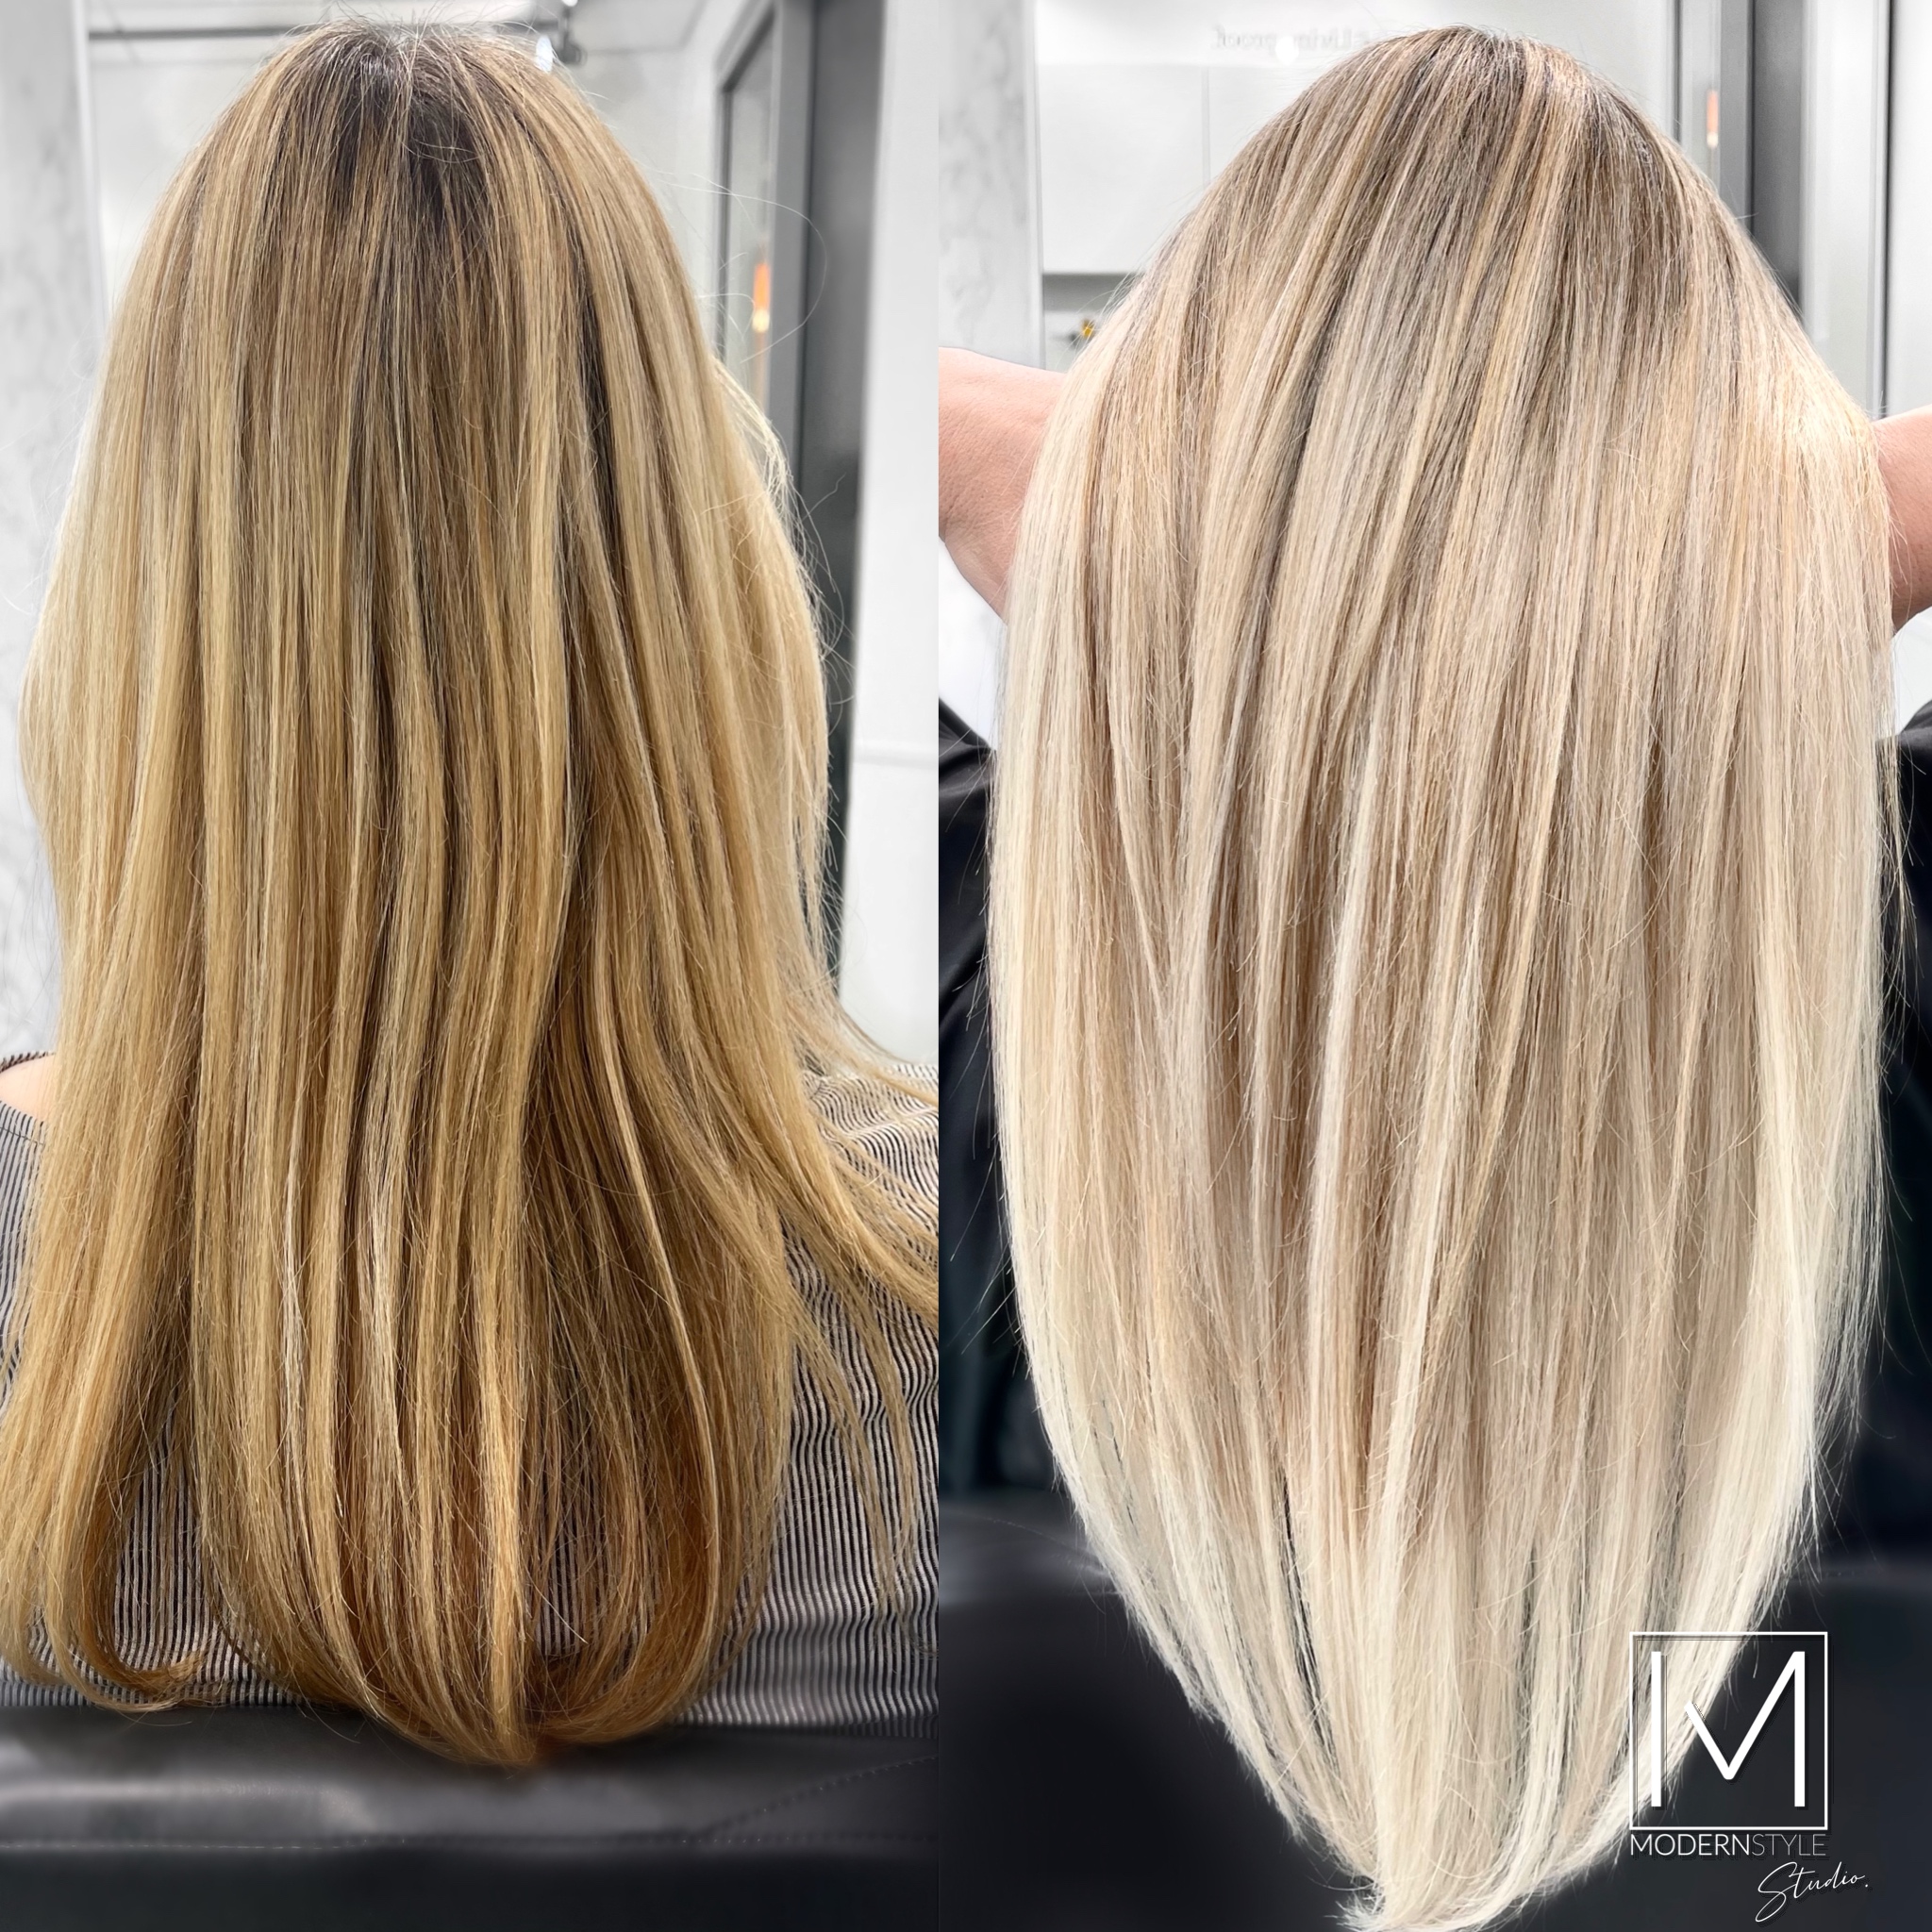 Hair extensions near me, hand tied extensions, color correction specialist, bellami hair extensions, hair extension specialist near me, blonde specialist near me